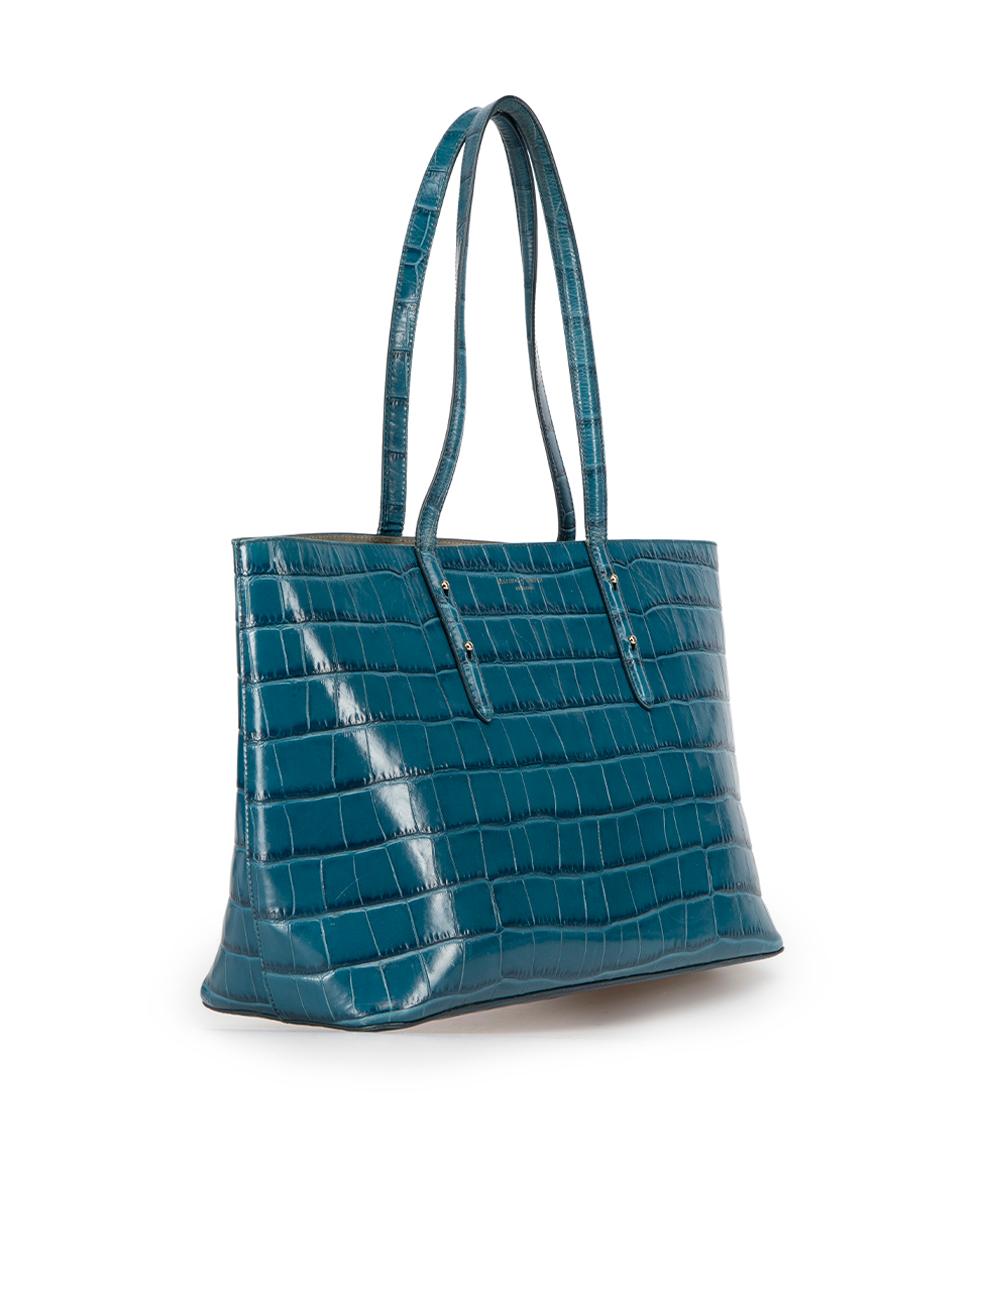 CONDITION is Good. General wear to tote is evident. Moderate discolouration to lining, small scuff marks to outer corners and creasing and light damage to handles on this used Aspinal of London designer resale item.



Details


Teal

Croc embossed